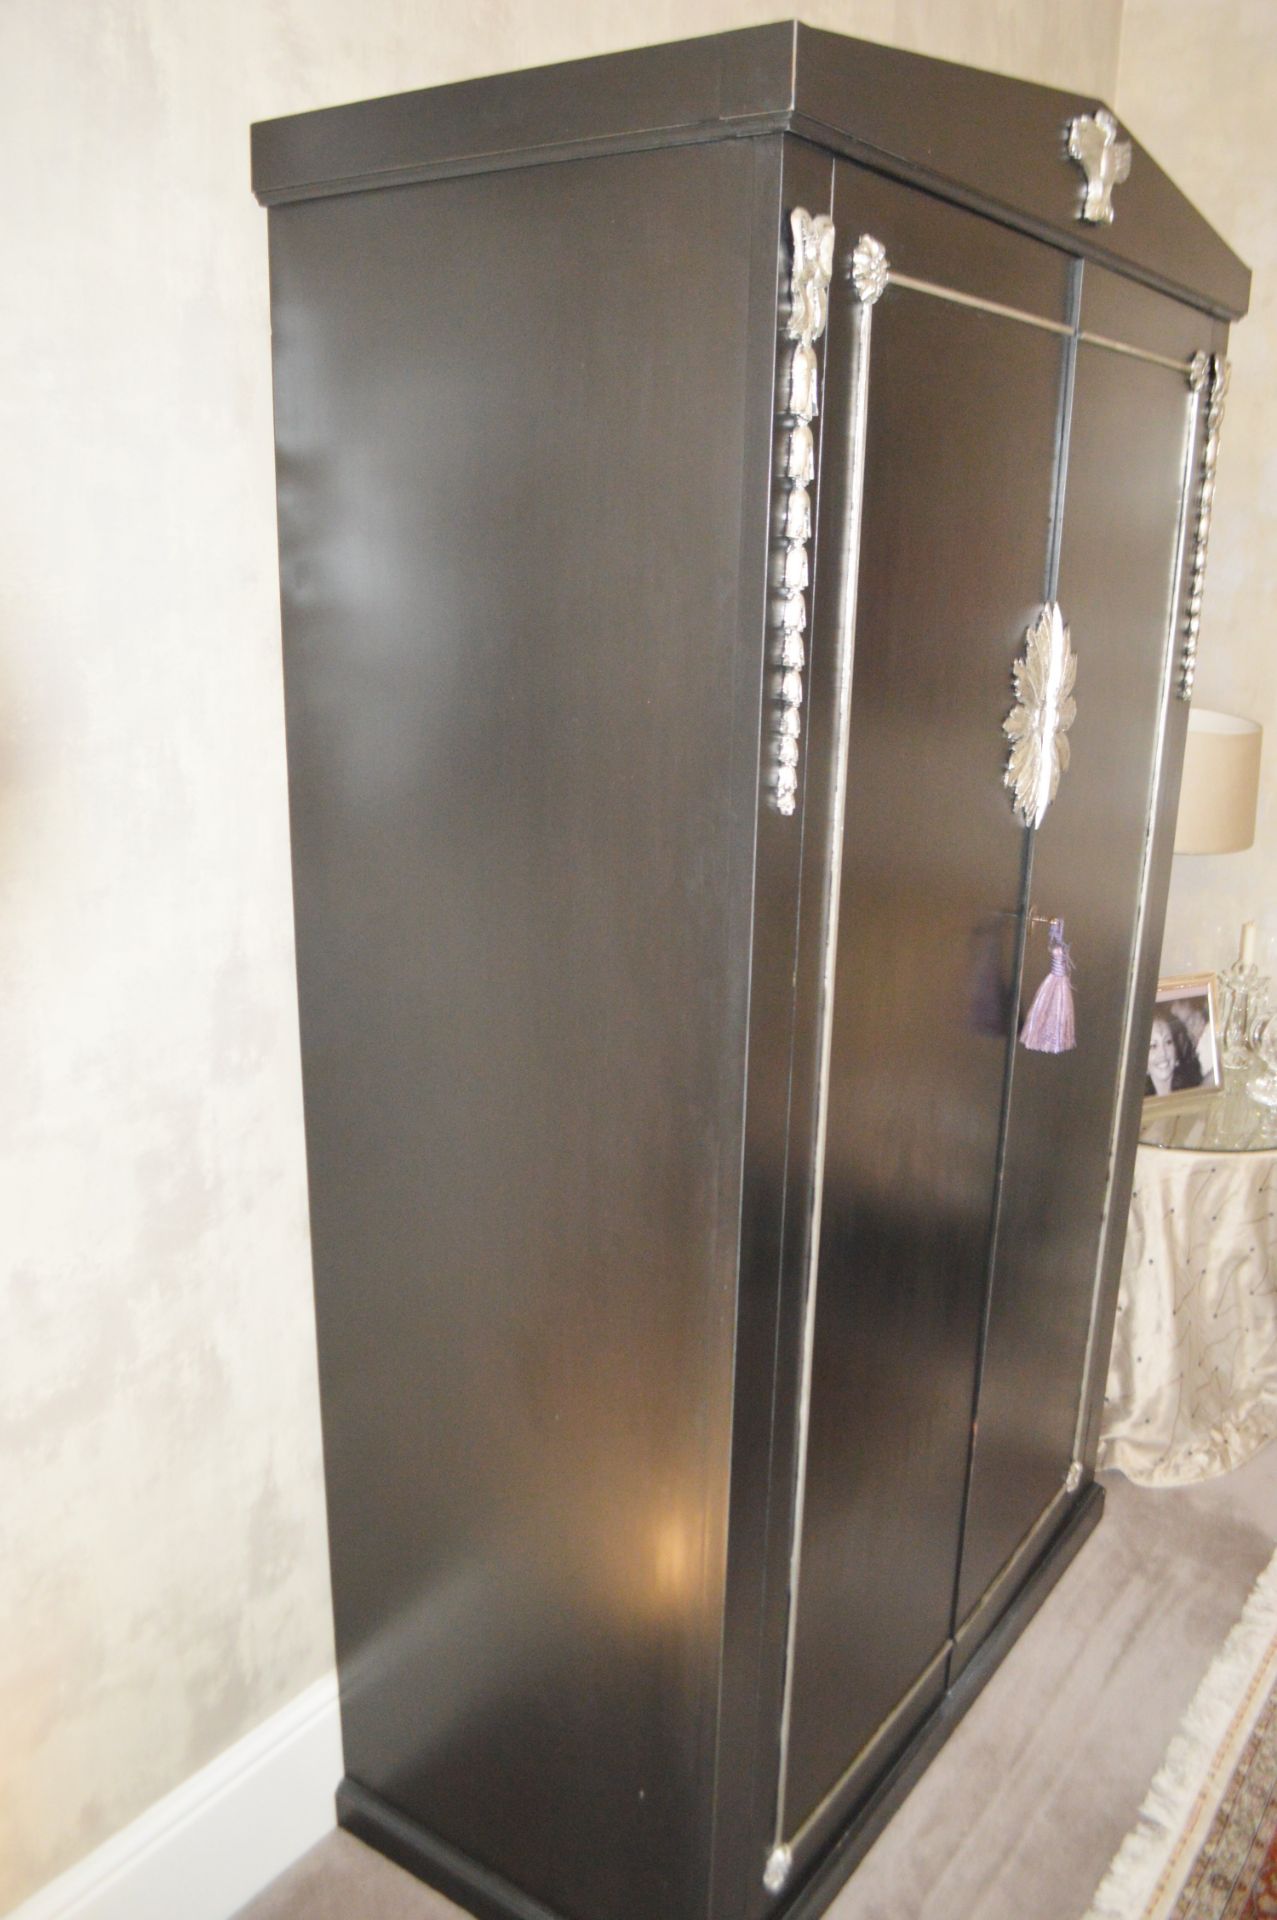 1 x Bespoke Tall cupboard With Glass Shelves Contents Not Included To Be Removed From An Exclusive - Image 4 of 5